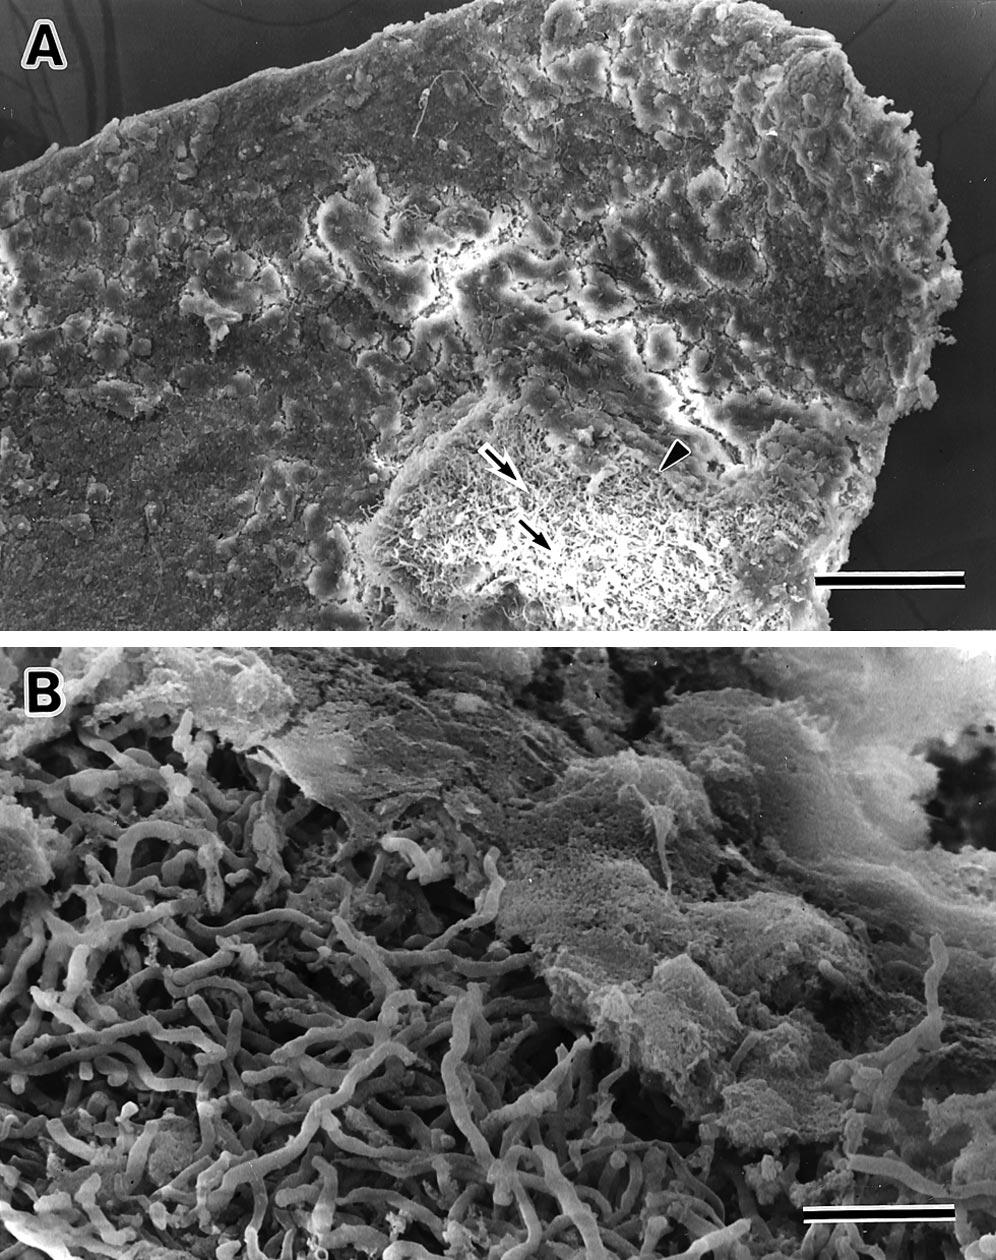 Vol. 28, No. 10, October 2002 Extraradicular Bacterial Biofilm 681 FIG. 3. SEM image of extruded gutta-percha. (A) Bacterial cells aggregate without a covering of a glycocalyx-like structure (arrows).